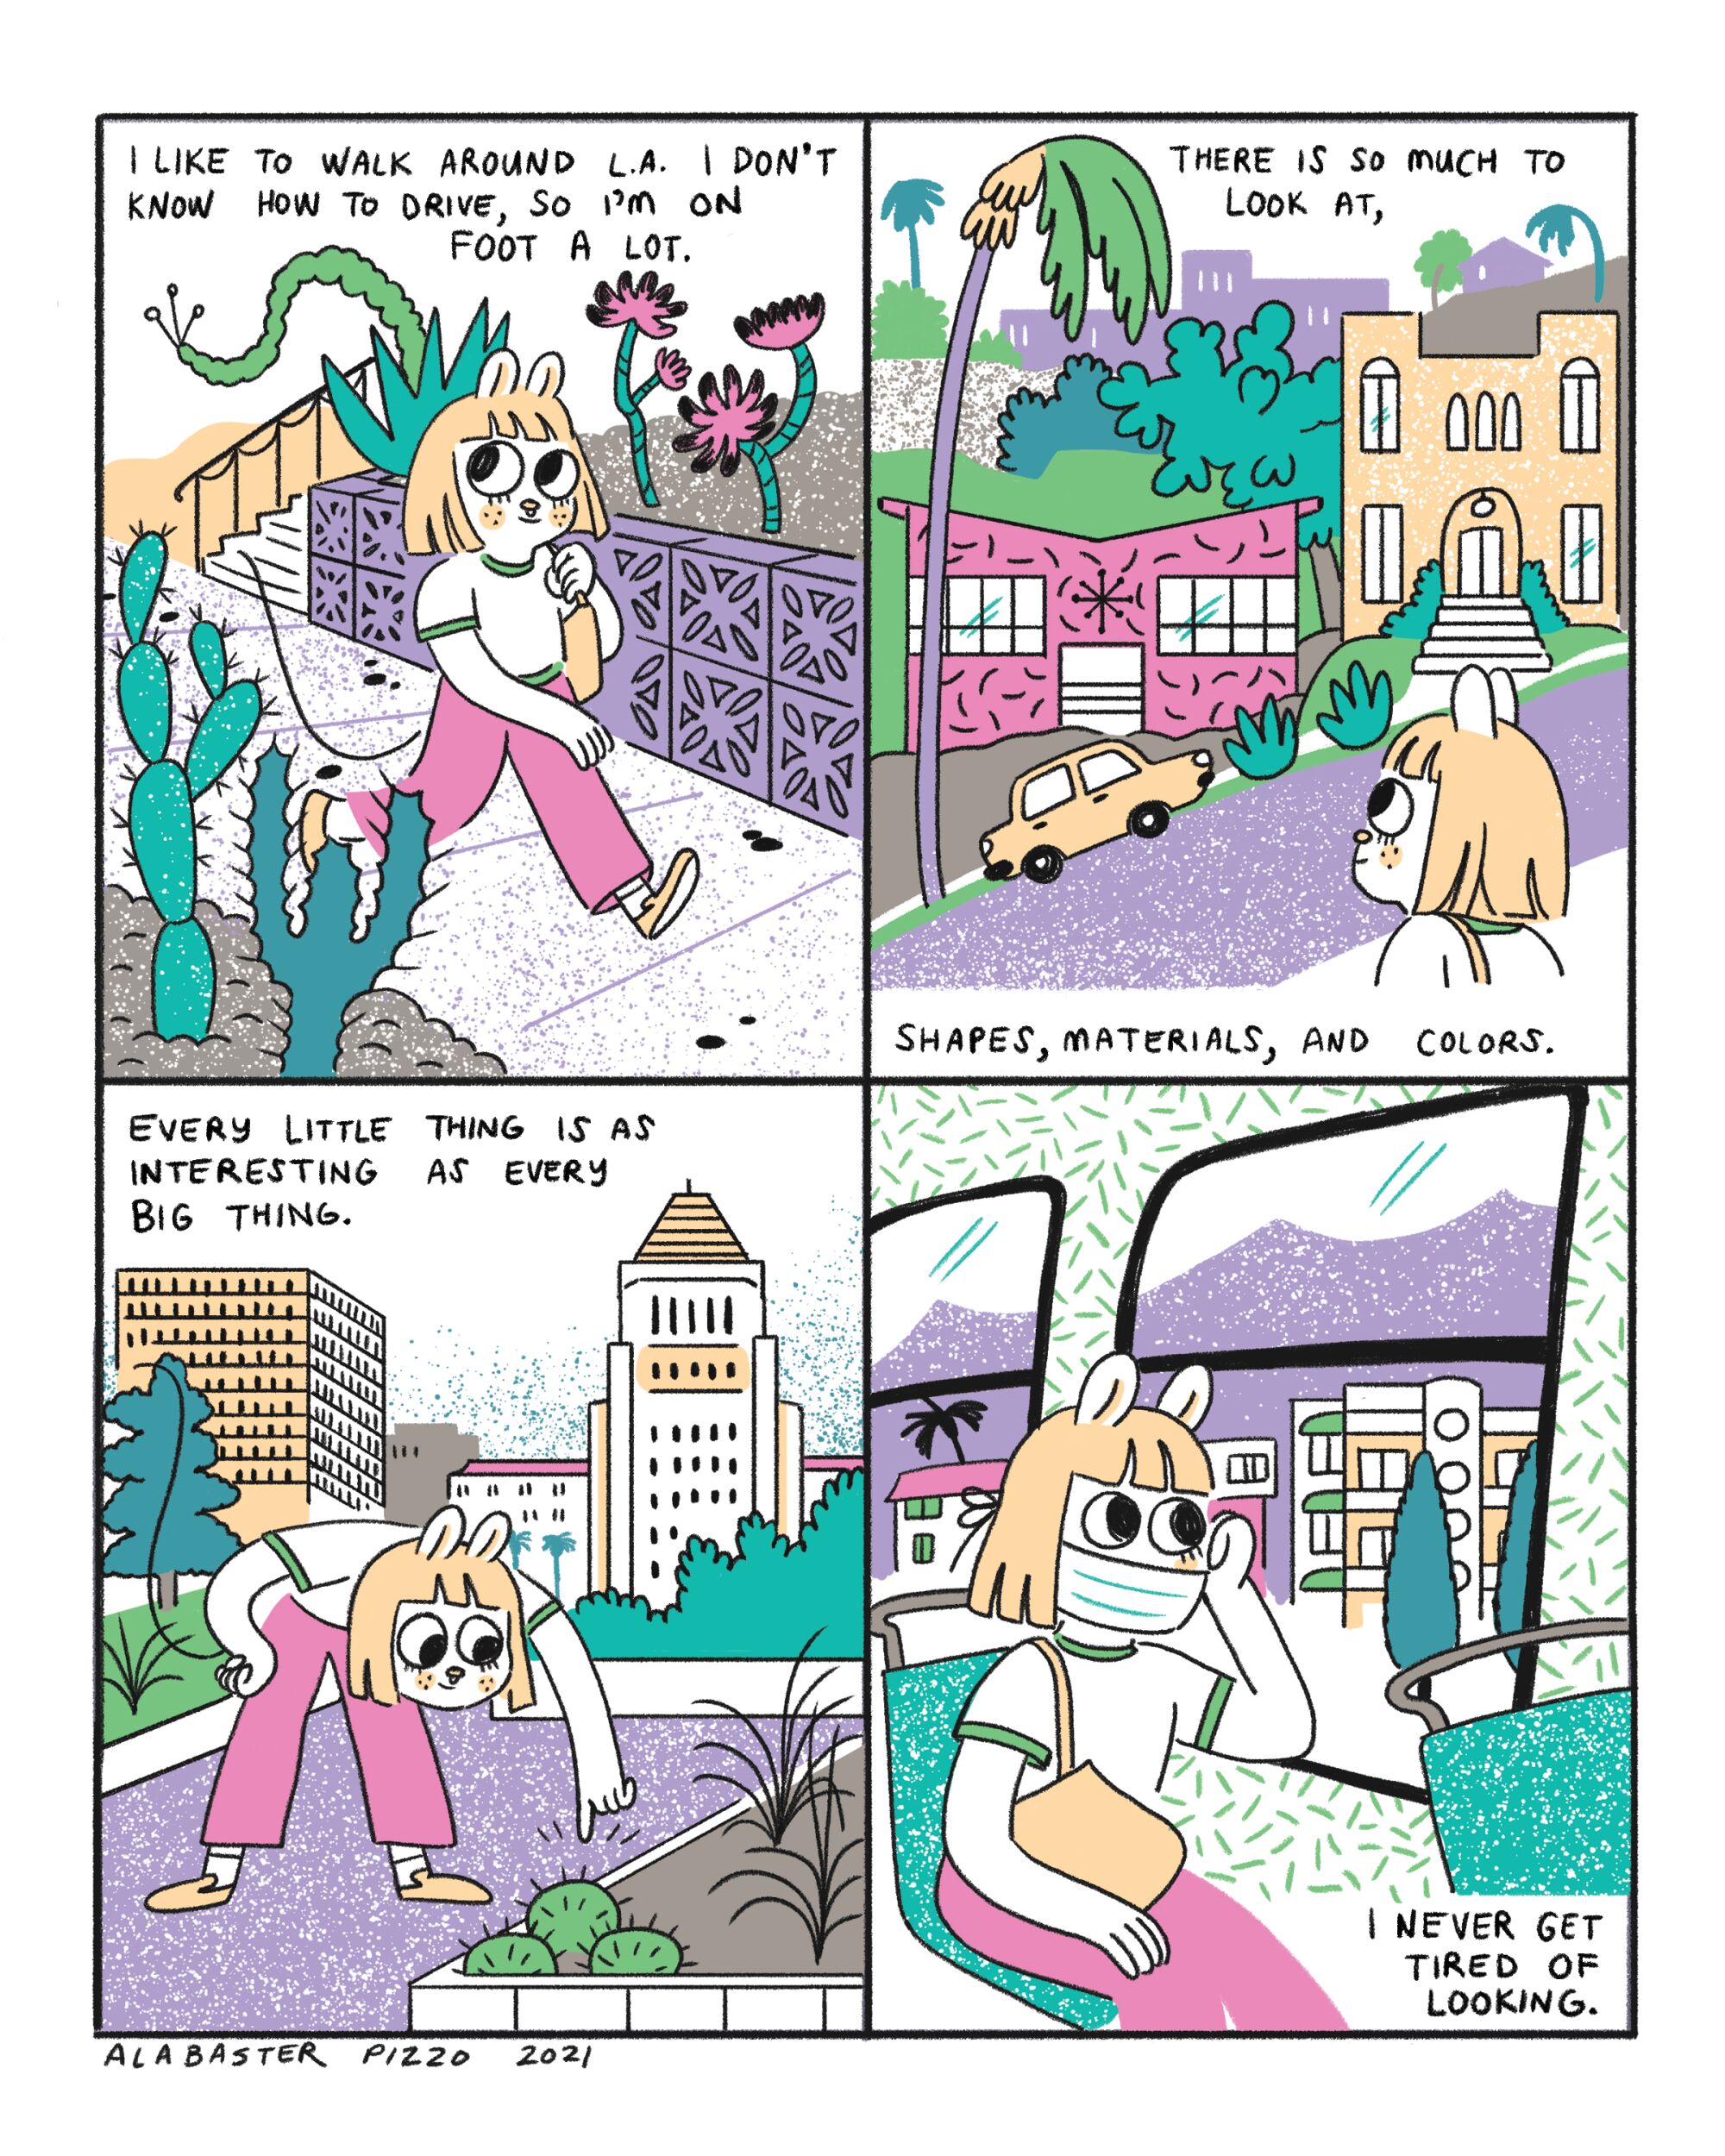 A four-panel comic features a woman walking around a city.